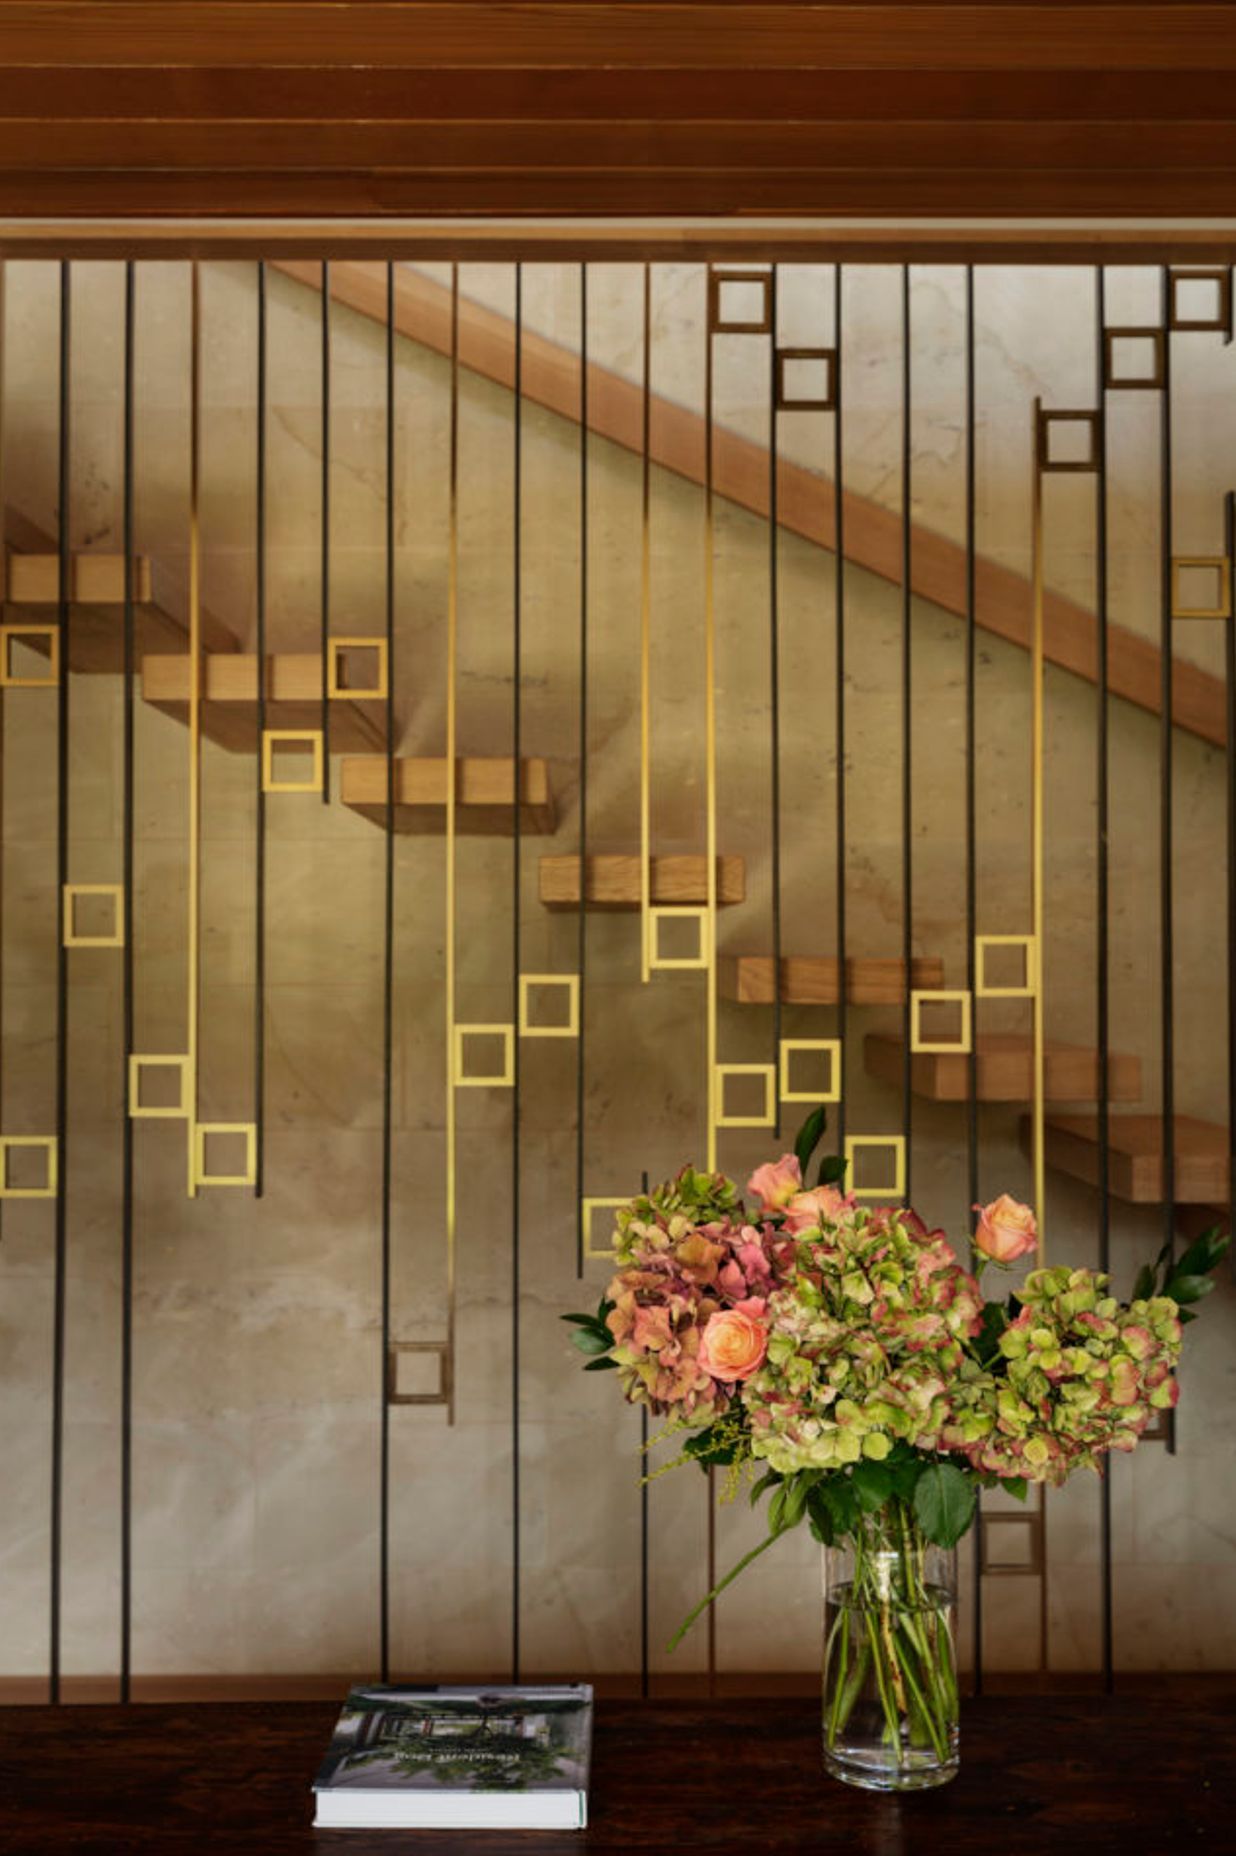 The beautiful staircase screen was designed by Edwards and crafted by Powersurge.